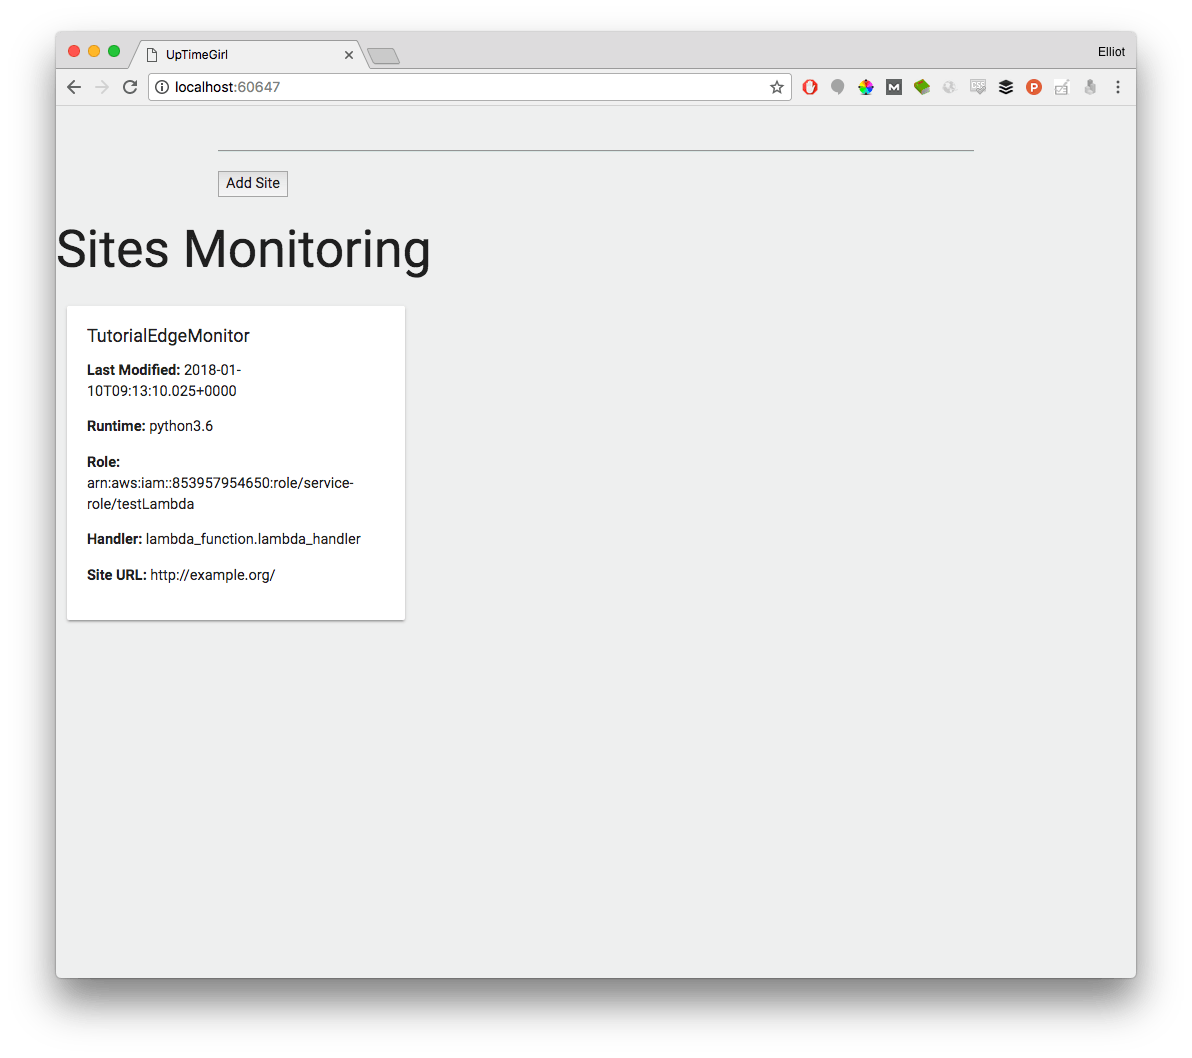 /creating-a-website-monitoring-service-in-half-an-hour-using-lambdas-4f64fb199df3 feature image